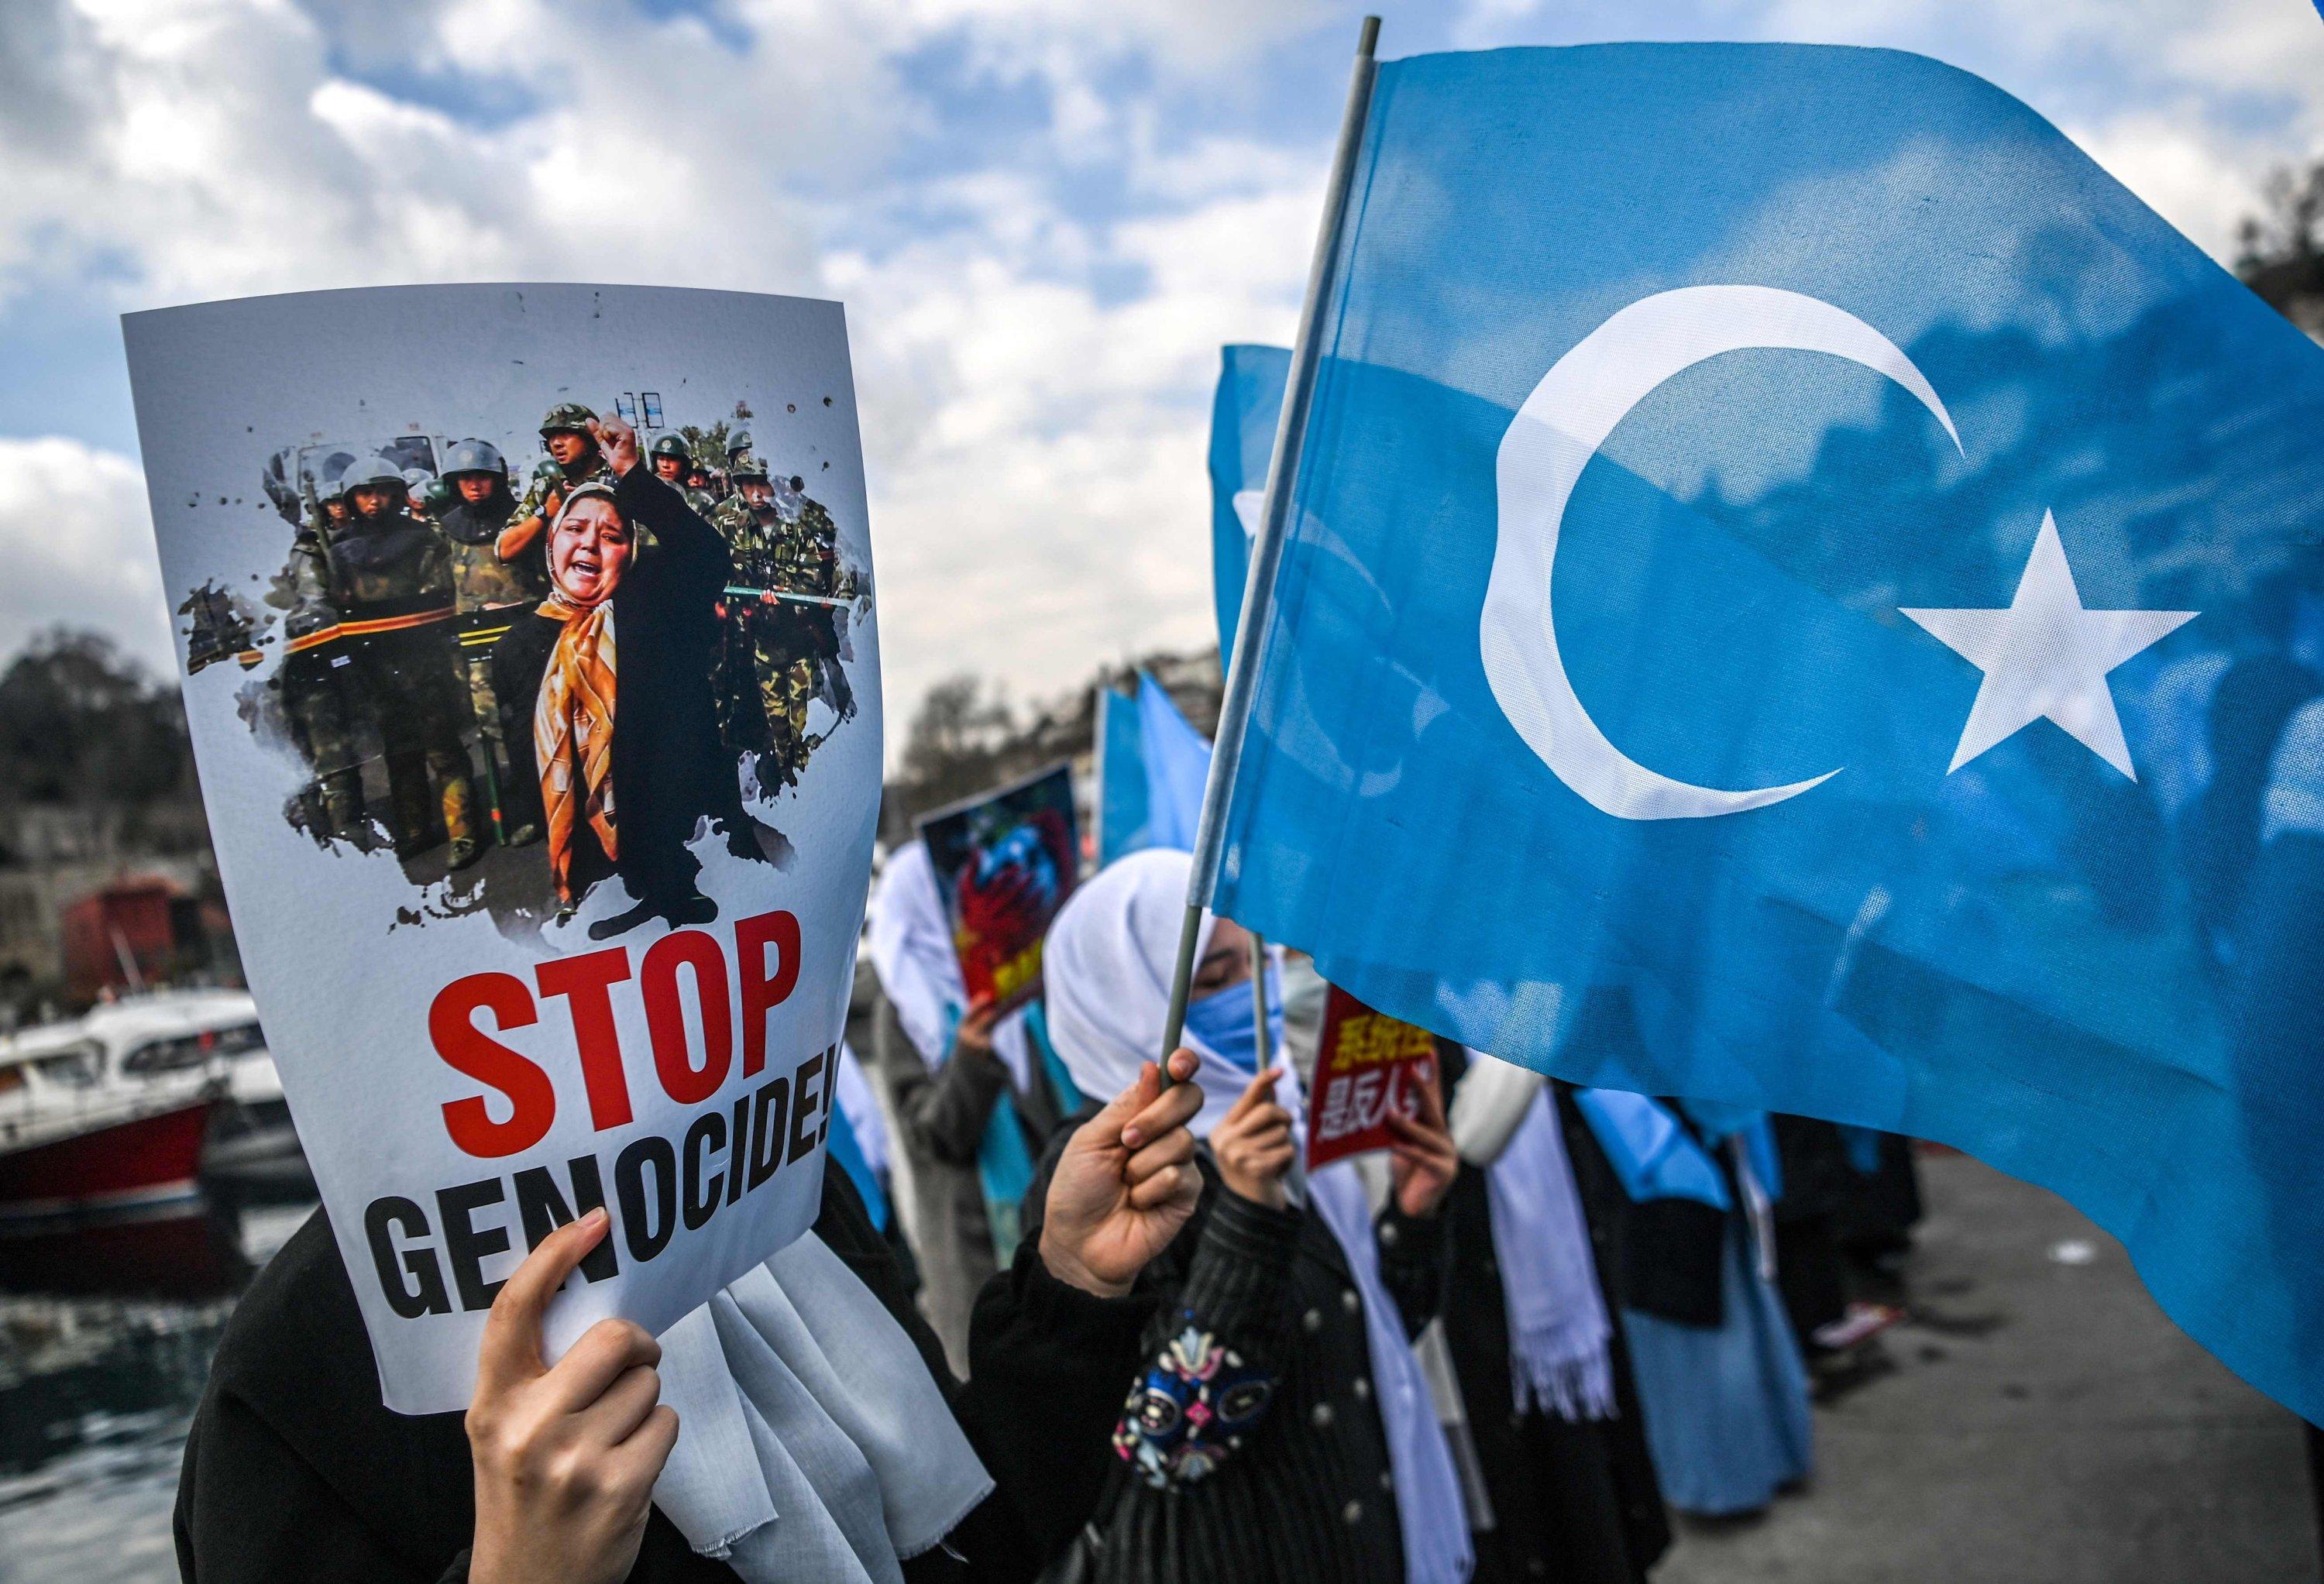 Uighur women march in Istanbul against China camps